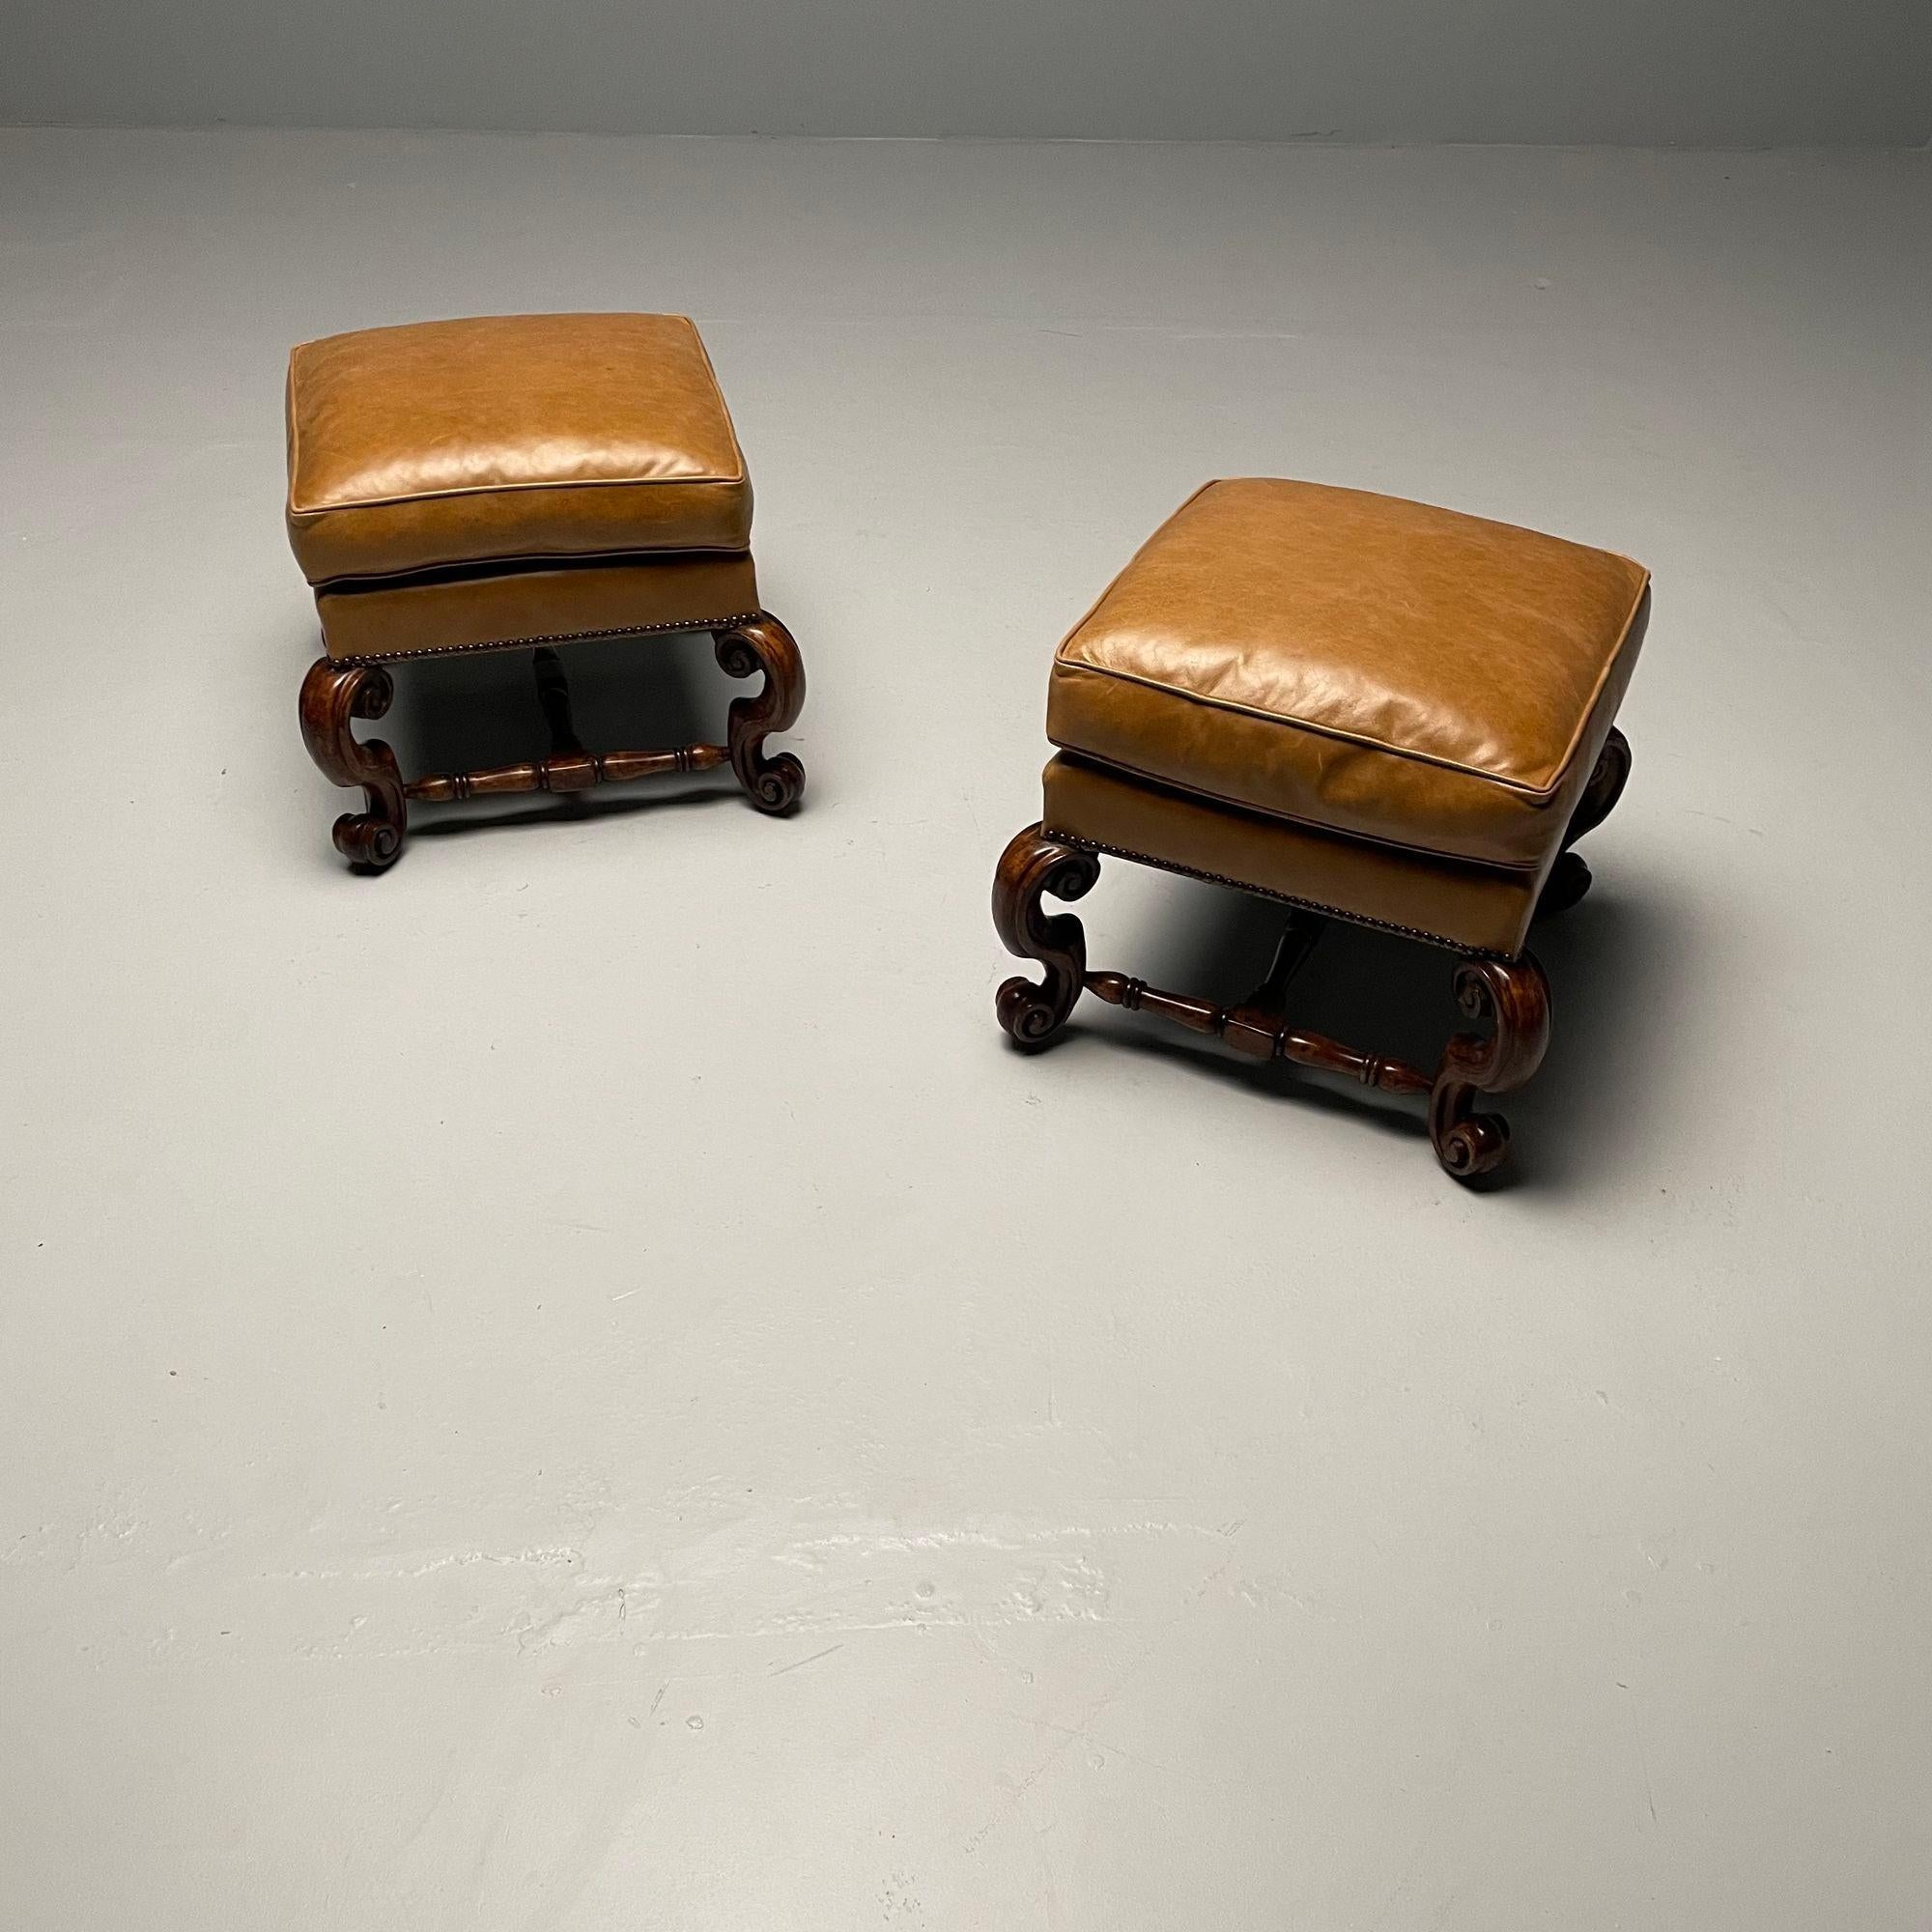 Georgian, Large Tufted Lounge Chairs and Ottomans, Tan Leather, USA, 2000s For Sale 9